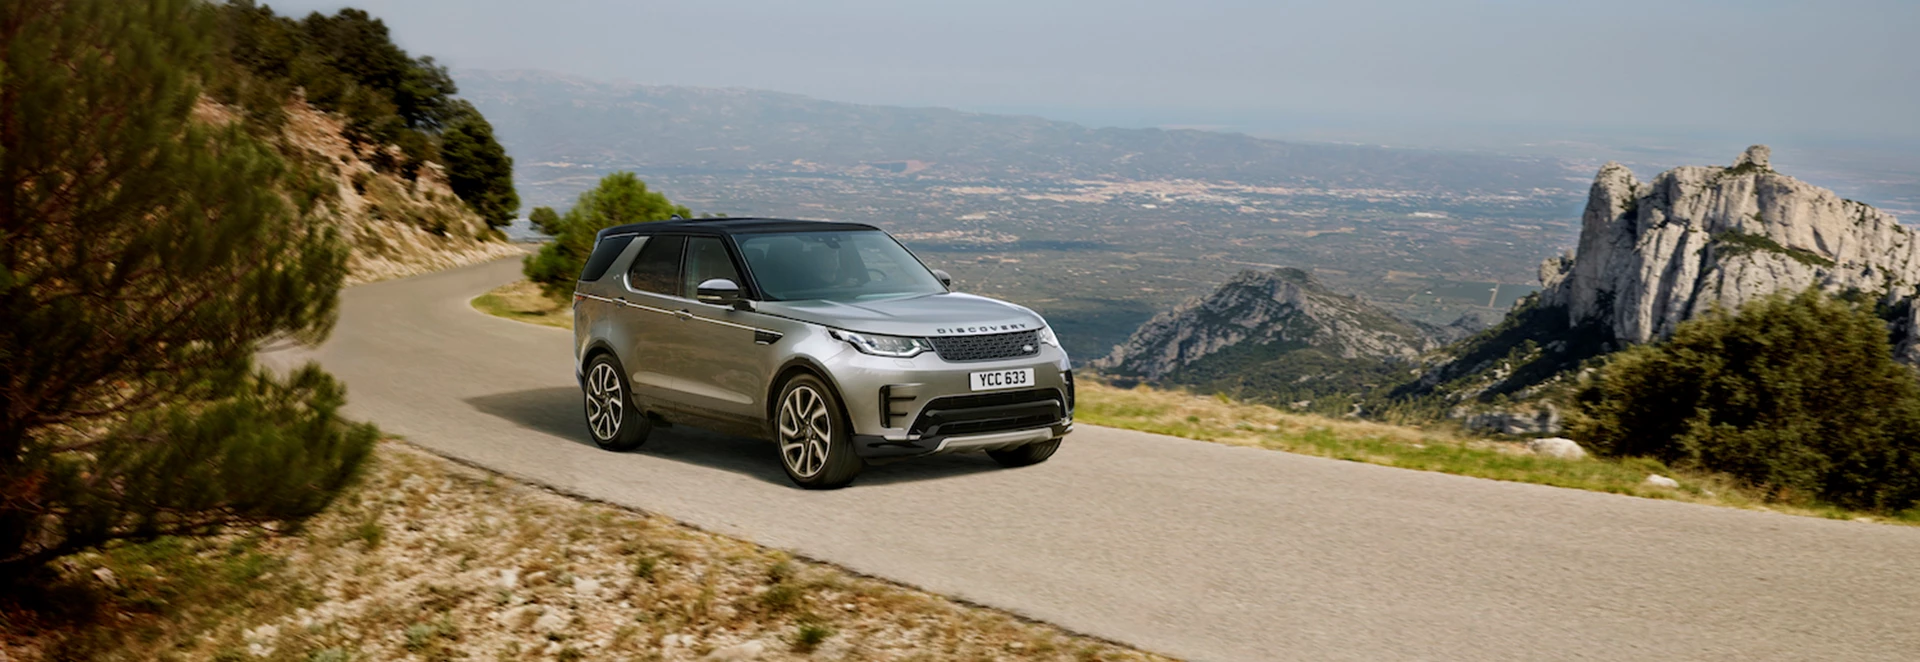 Land Rover Discovery Landmark Edition revealed 